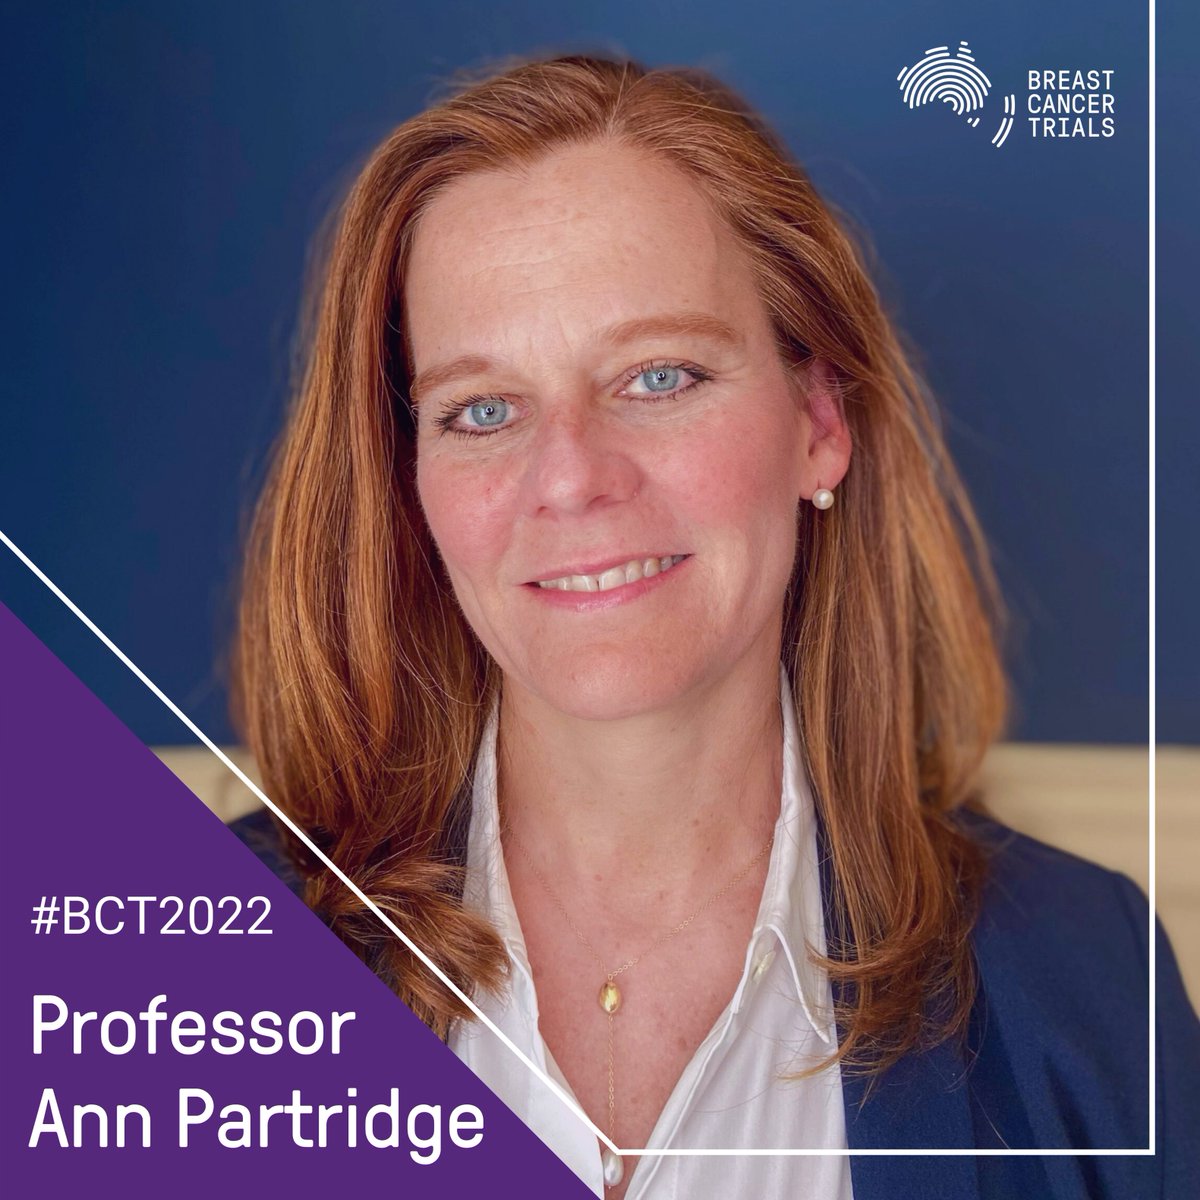 During BCT's 43rd ASM, we recorded interviews with International Guest Speakers on their research. @AnnPartridgeMD is a Professor of Medicine & Vice Chair of Medical Oncology. Click the link below to watch Professor Ann Partridge's video. youtube.com/watch?v=vOoccC…